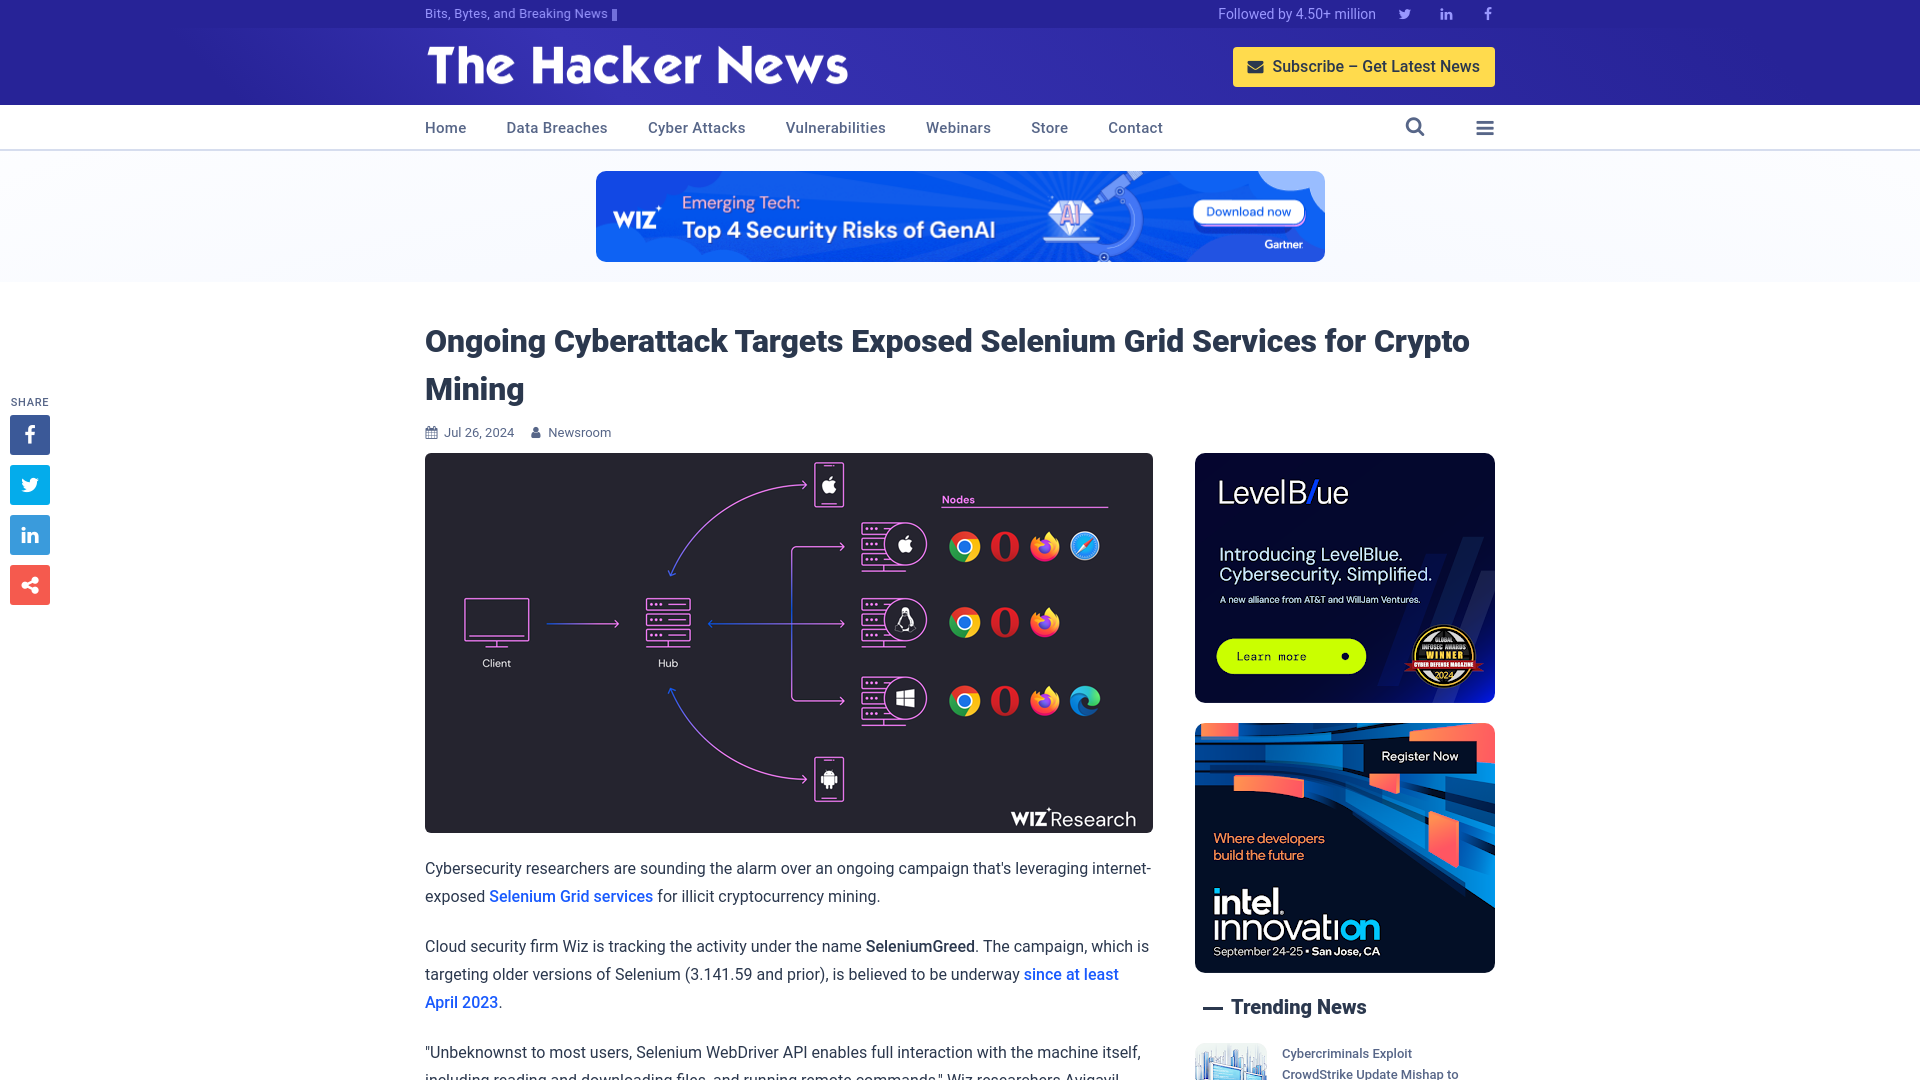 Ongoing Cyberattack Targets Exposed Selenium Grid Services for Crypto Mining